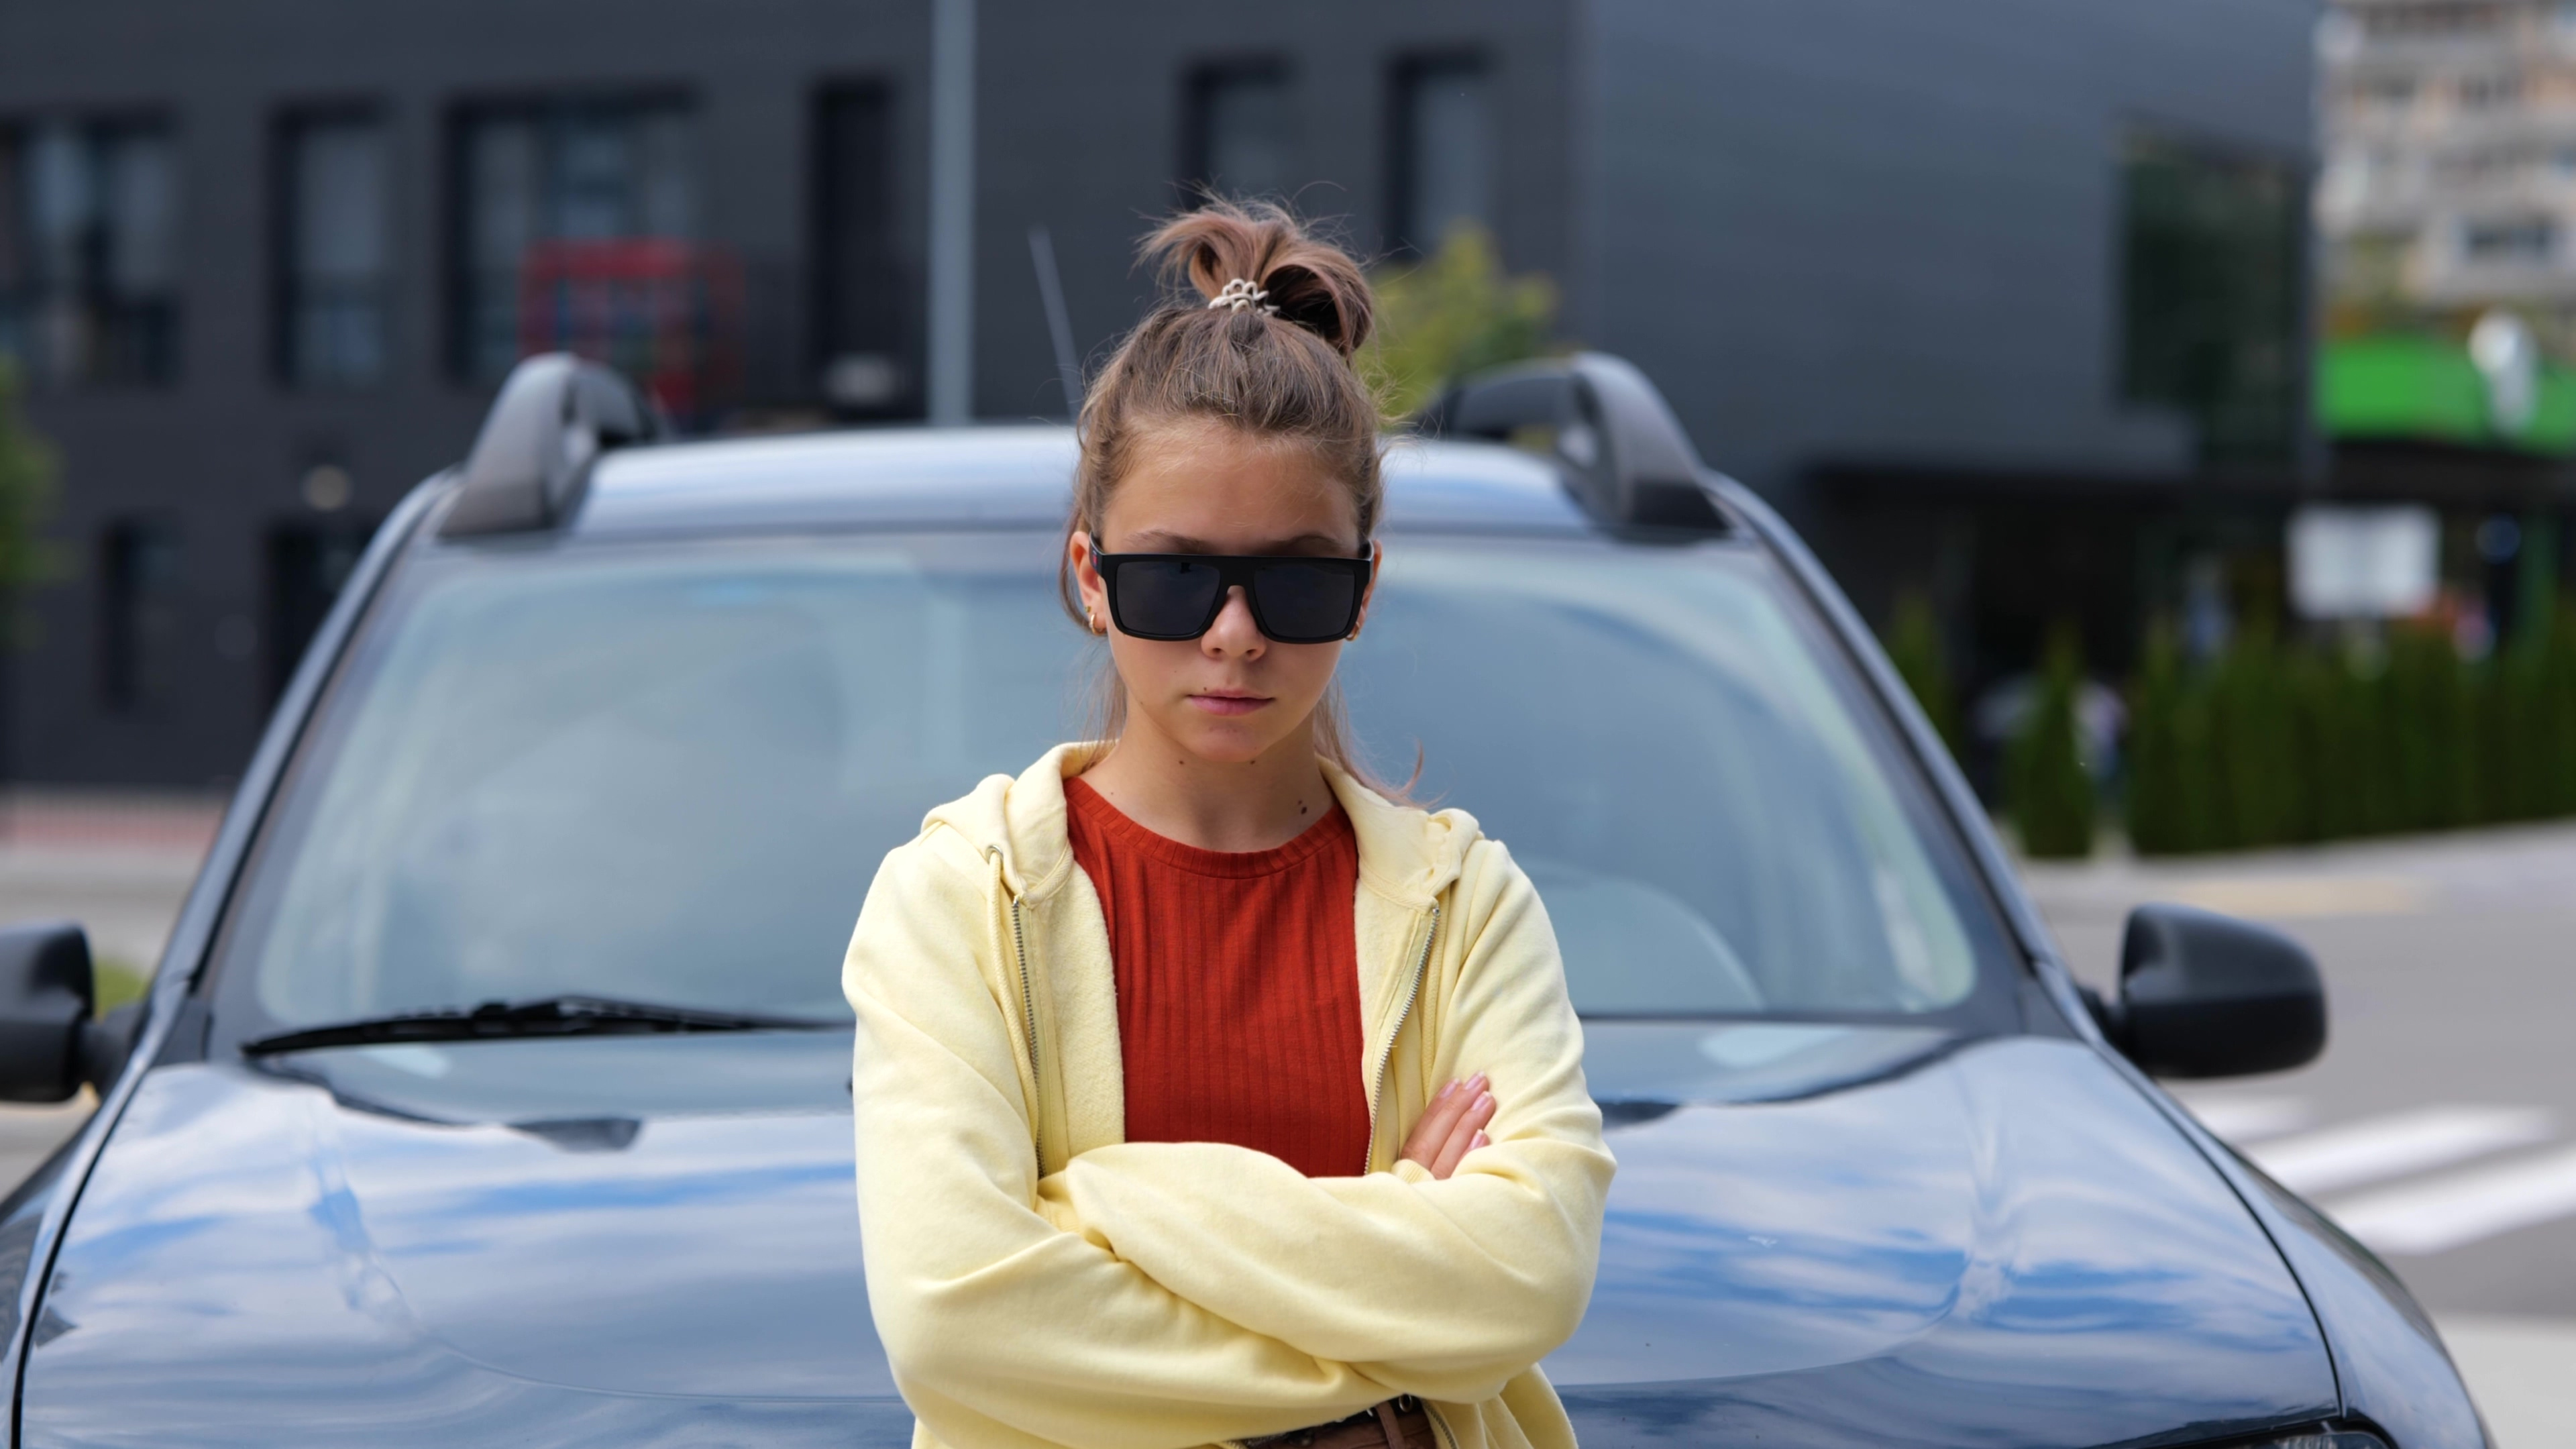 Person with arms crossed standing in front of a car, wearing sunglasses, on a street